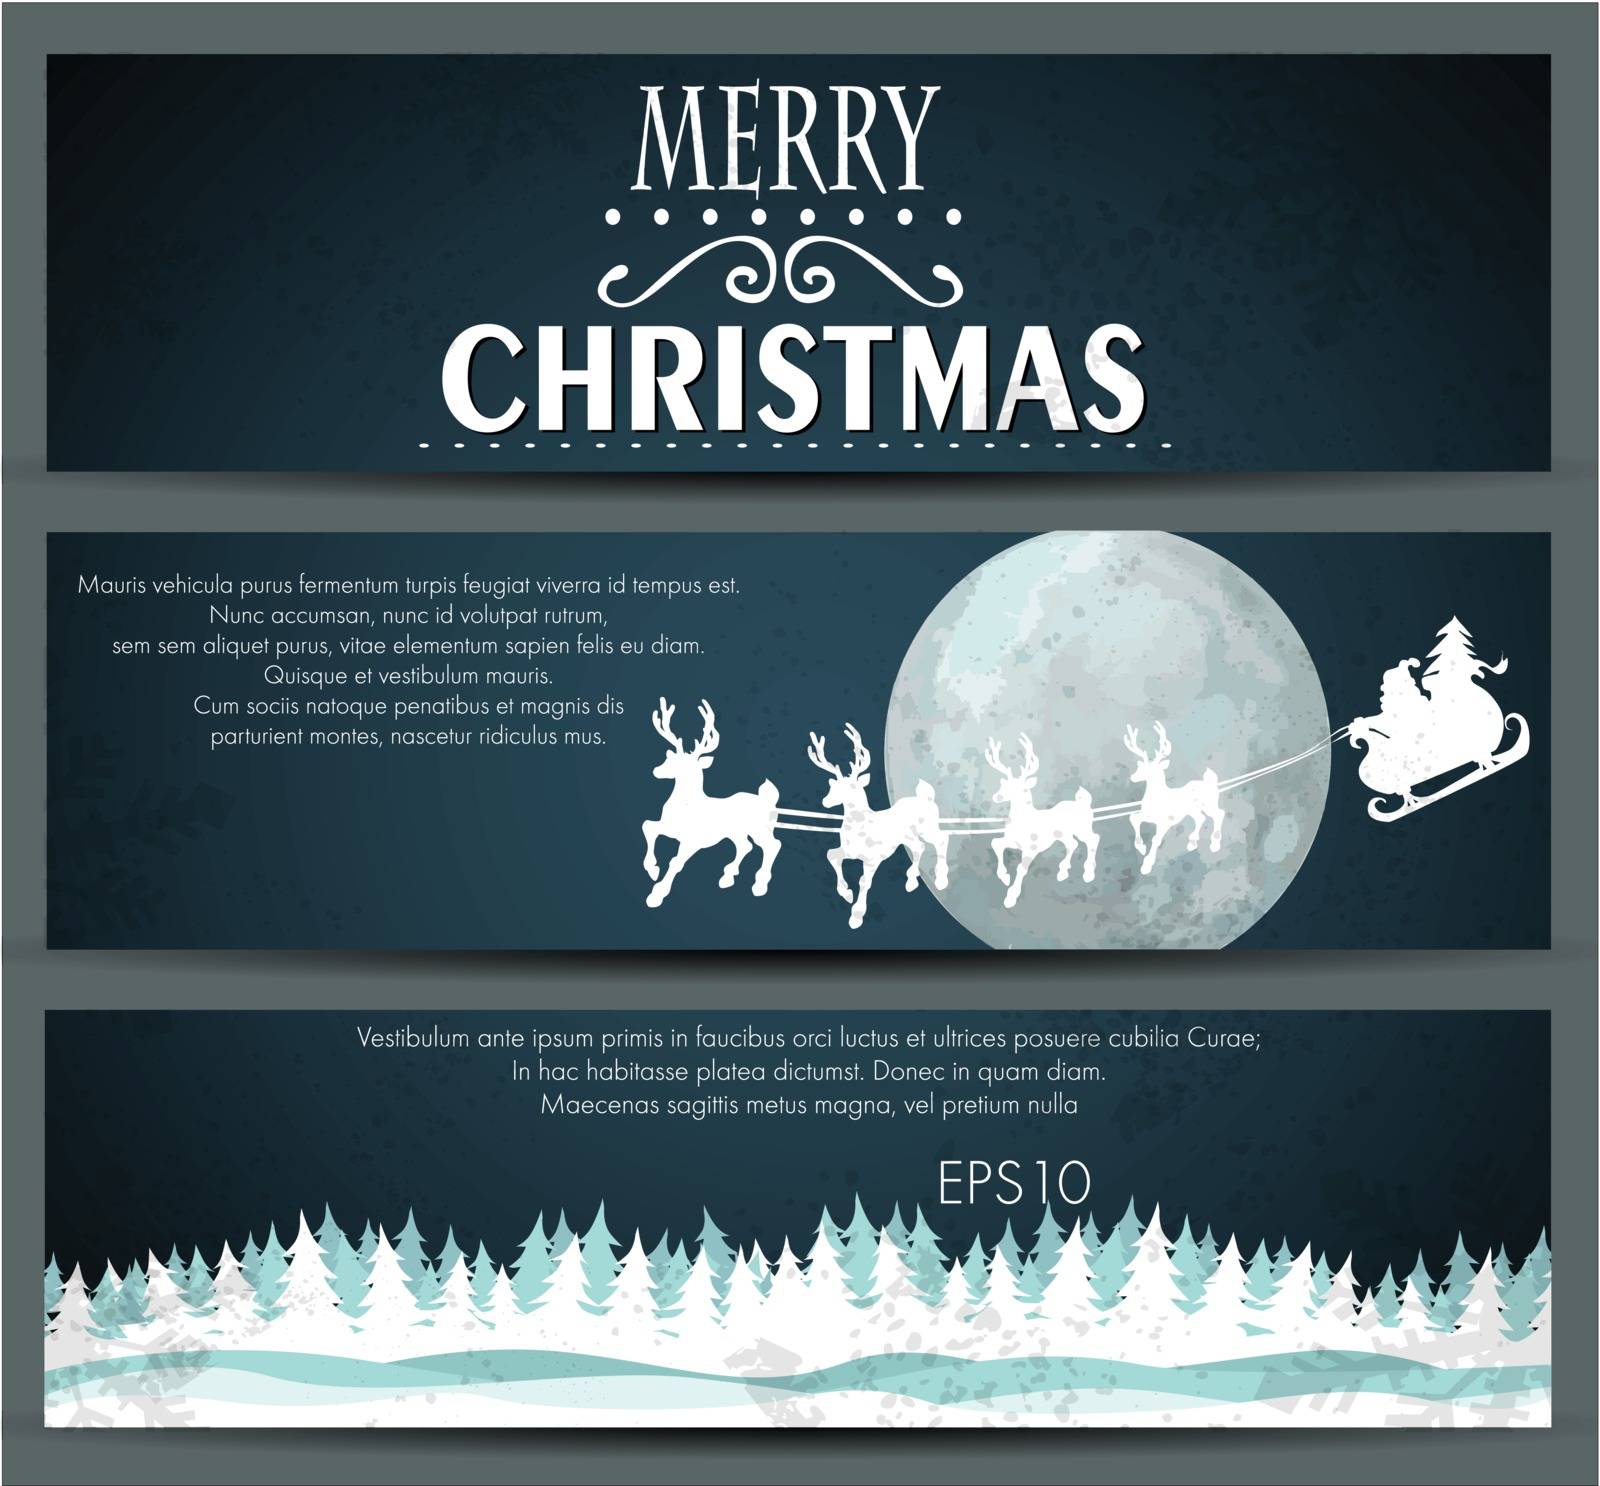 Christmas banners by robin2